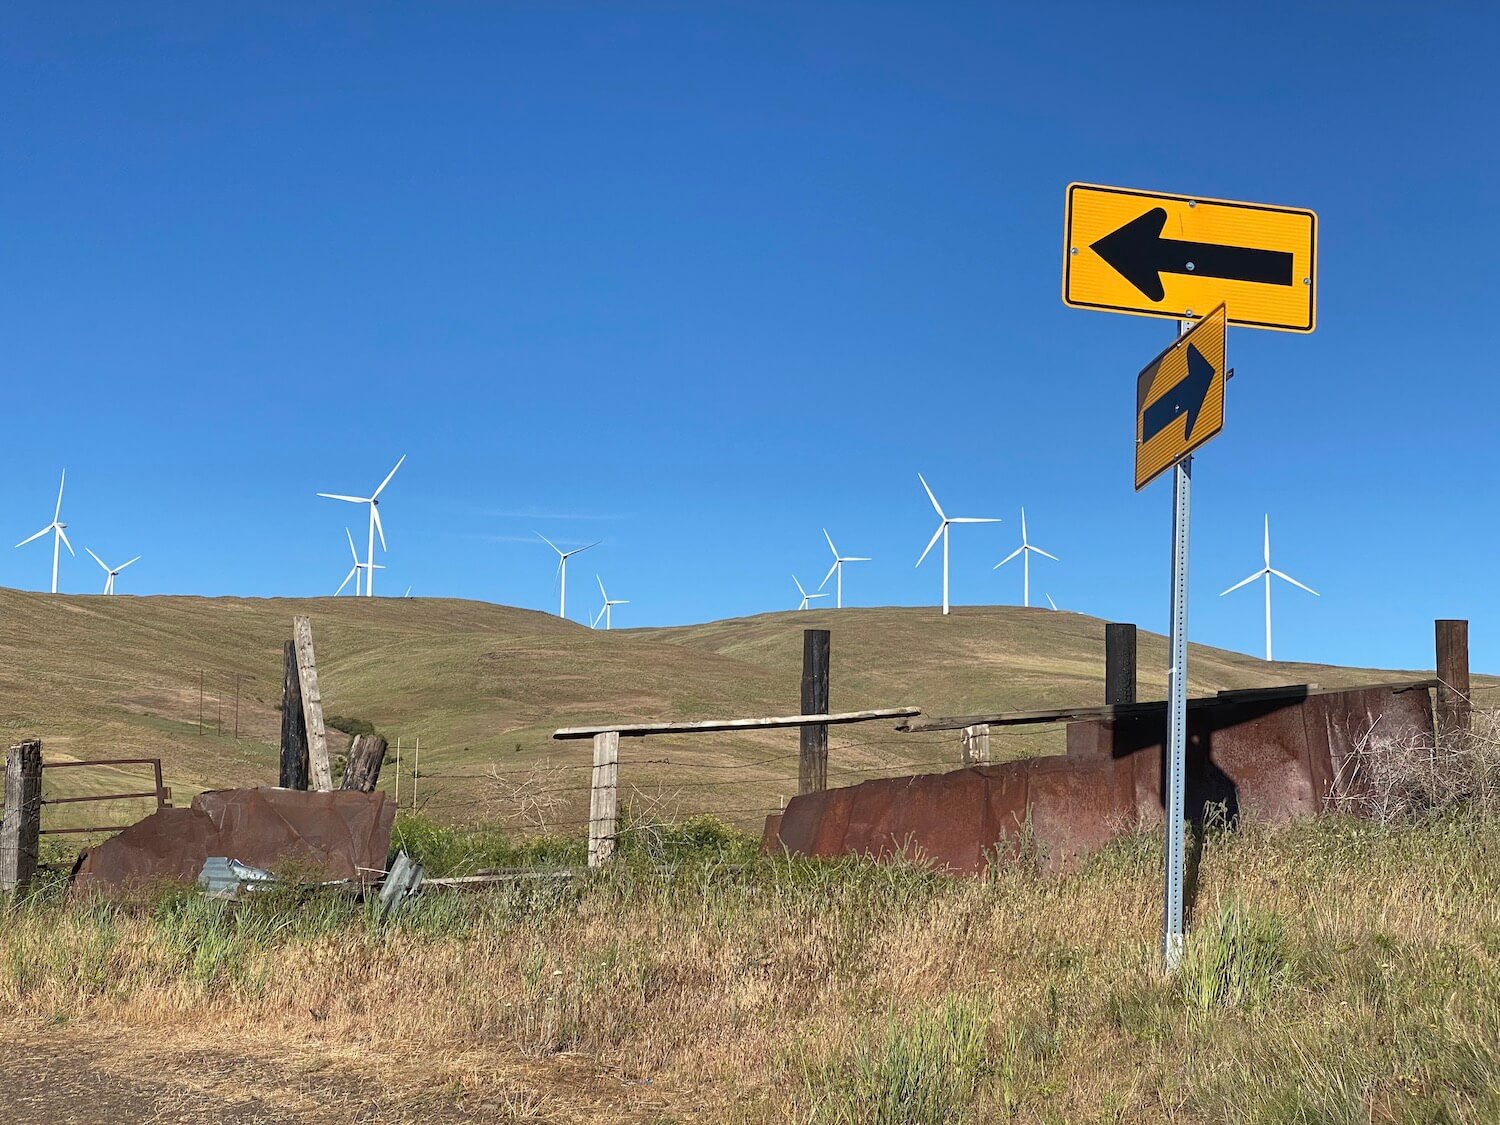 A hillside lined with giant white windmills reaches up to a blue sky while two orange road signs show arrows pointing in opposite directions.  There are pieces of rusted metal leaning up against a barbed wire fence. 